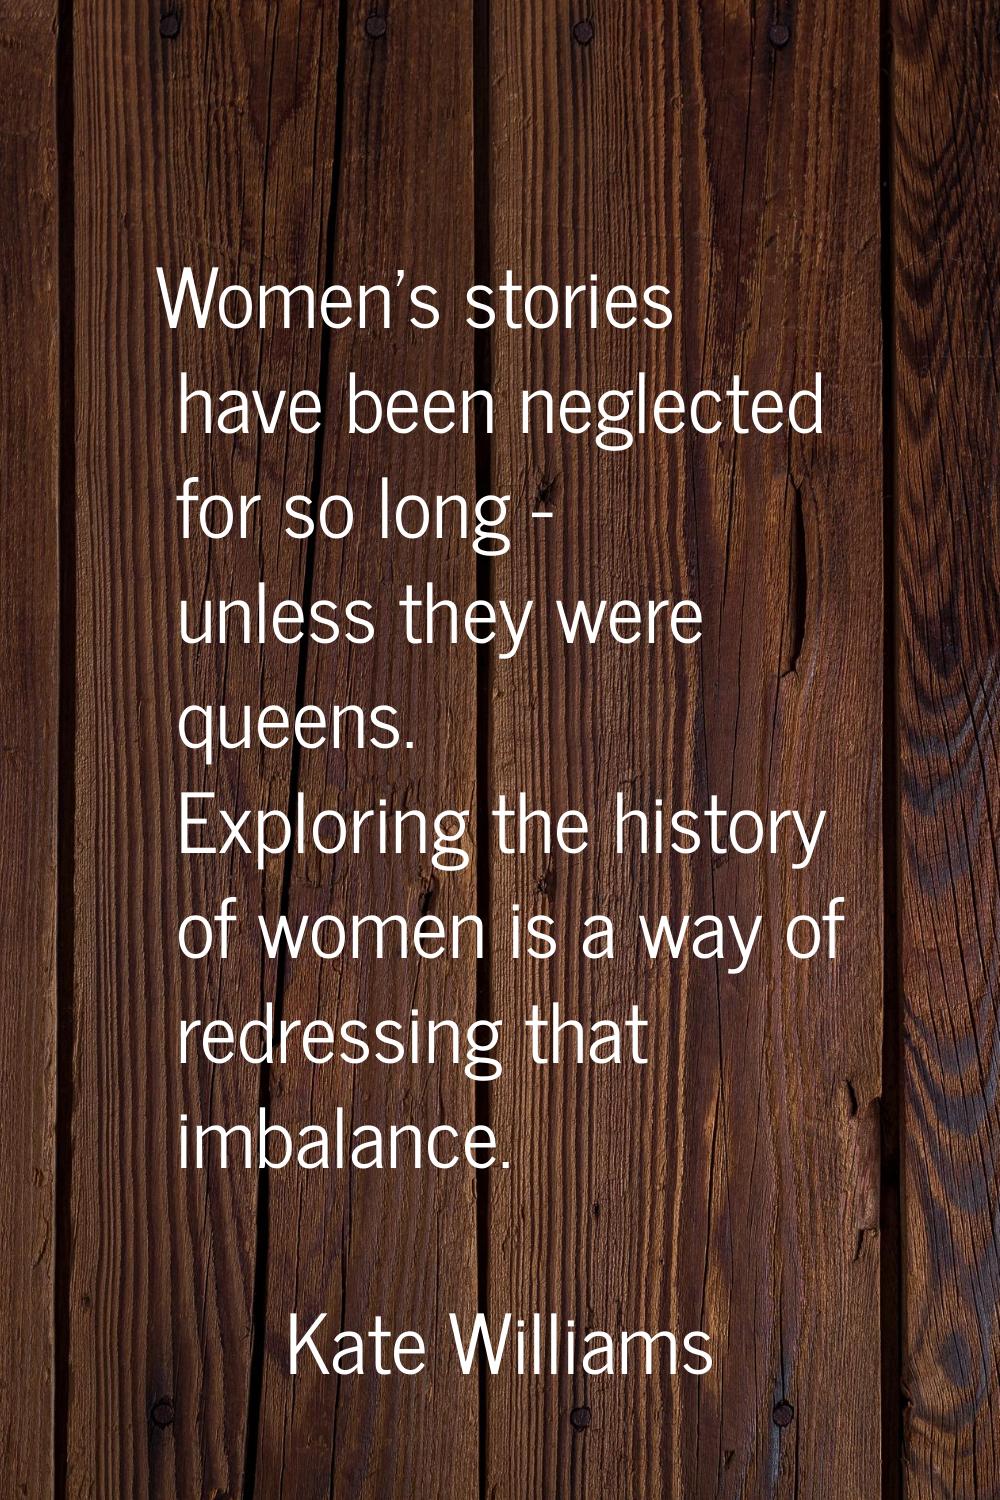 Women's stories have been neglected for so long - unless they were queens. Exploring the history of